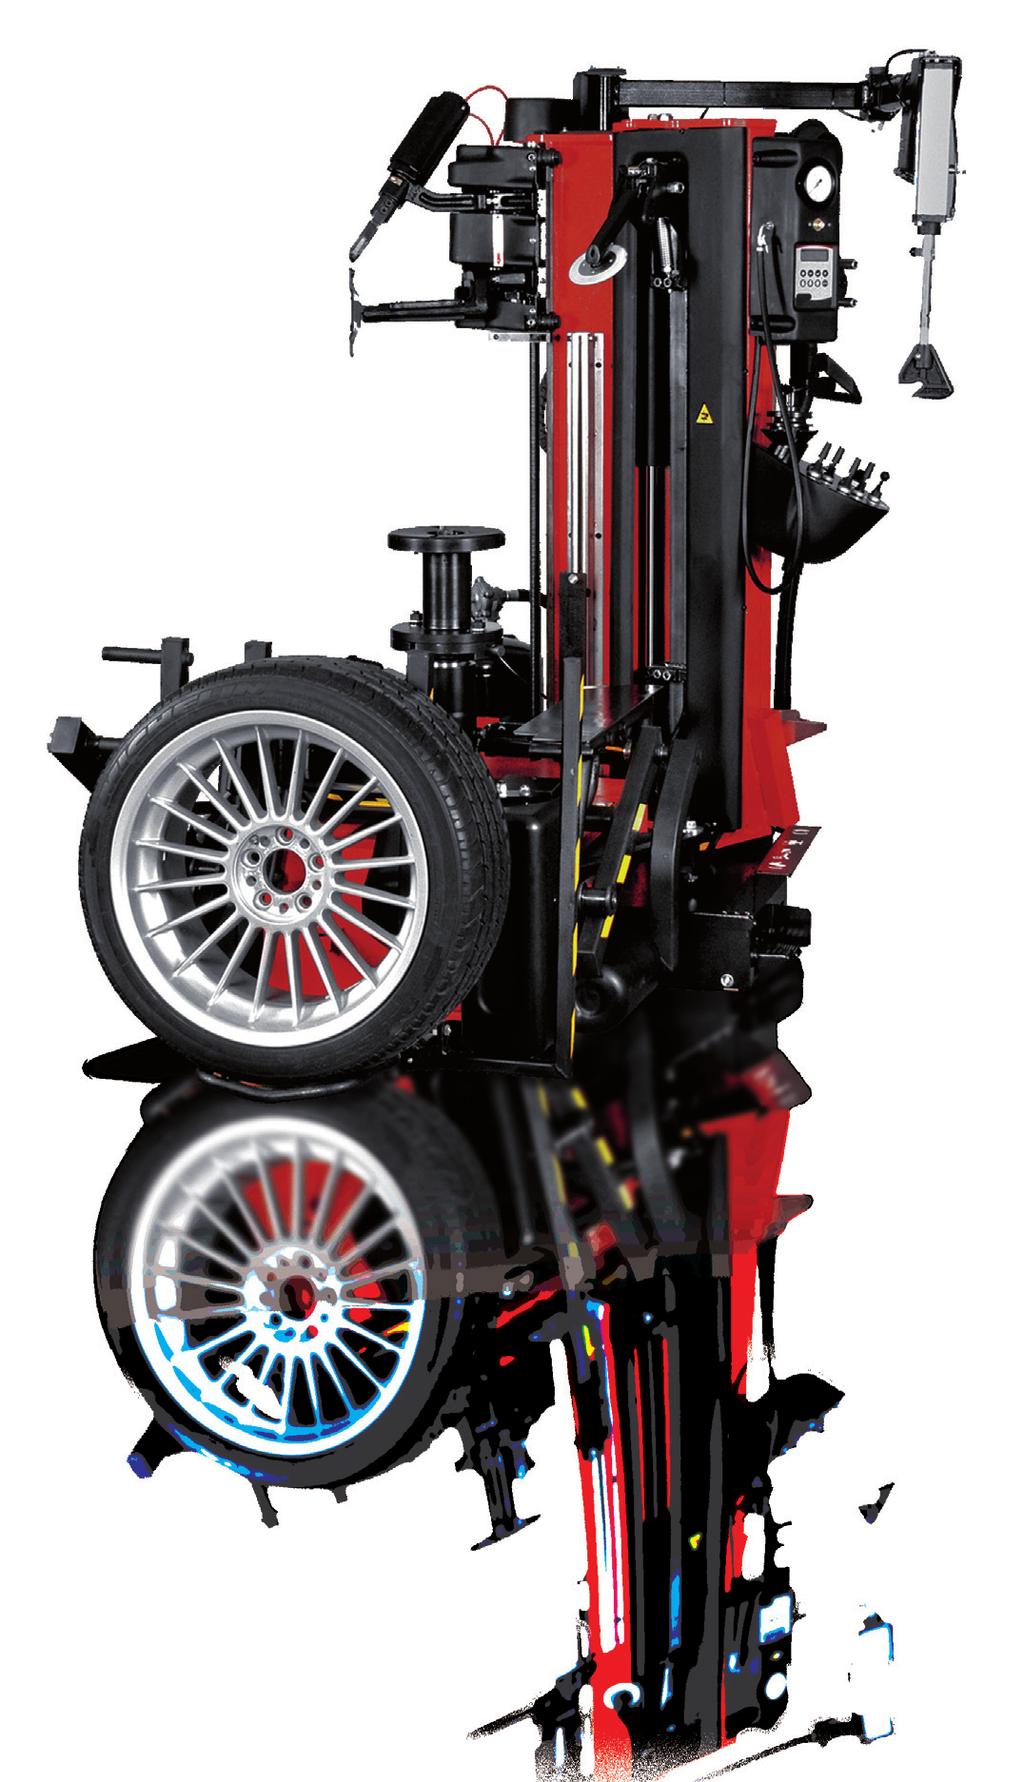 A U T O M AT I C R A N G E T Y R E C H A N G E R S Quadriga 1000-6028650 This automatic tyre changer with its quick procedures, controlled power and accuracy guarantees optimum results because all